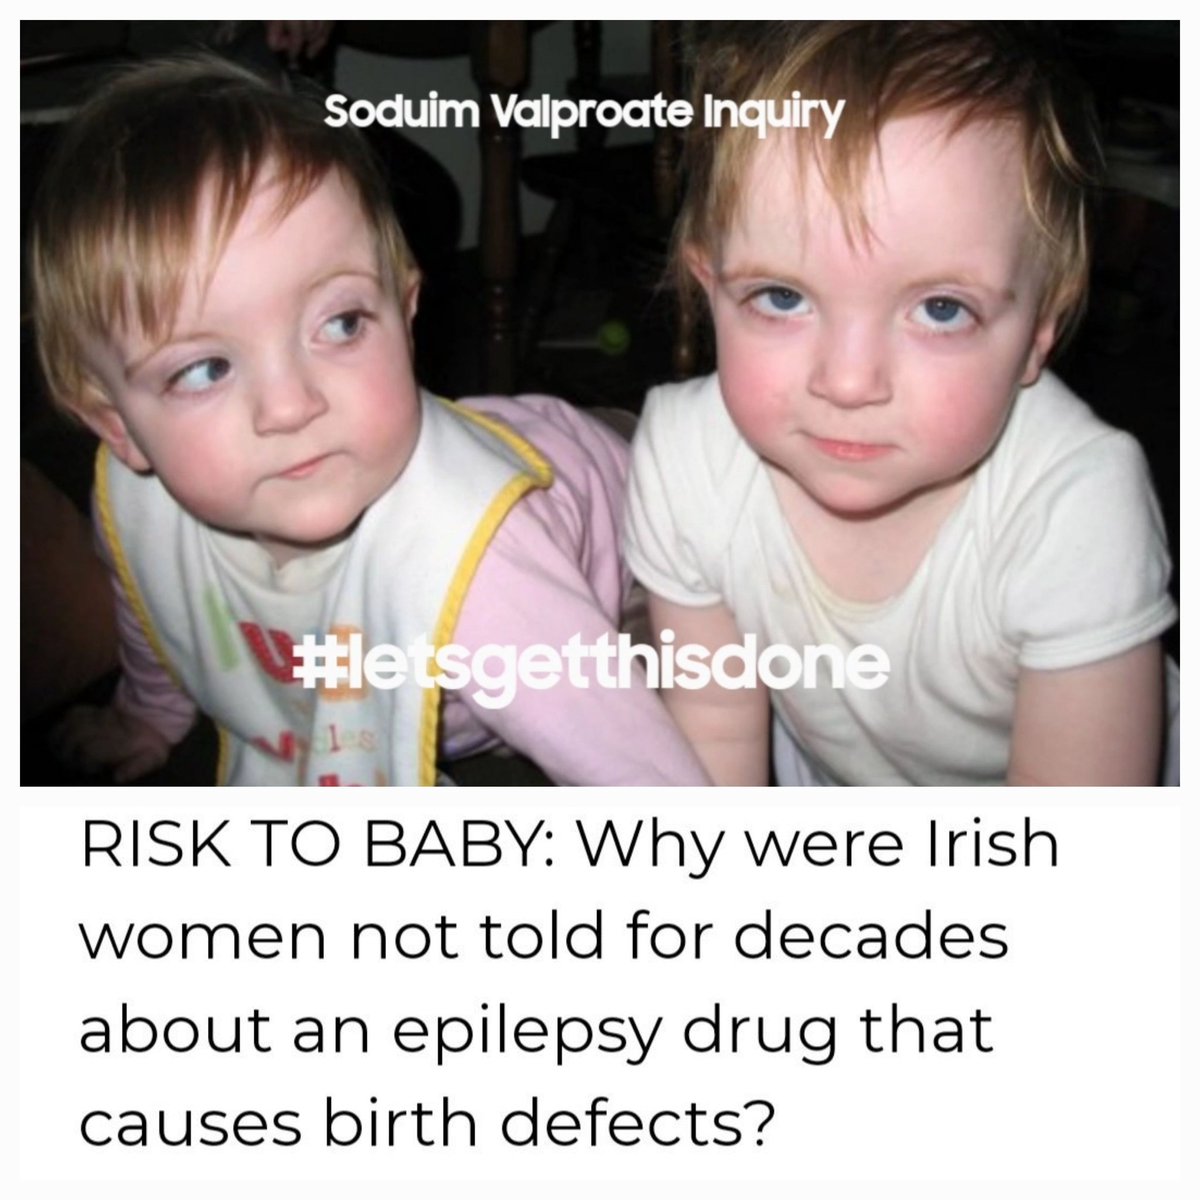 Both twins are harmed by #EPILIM (Sodium #Valproate) with multiple #birthdefects. @SimonHarrisTD @DonnellyStephen, @roinnslainte, you will know there is a need for #redress for all children harmed. As it is already clear, who is accountable.